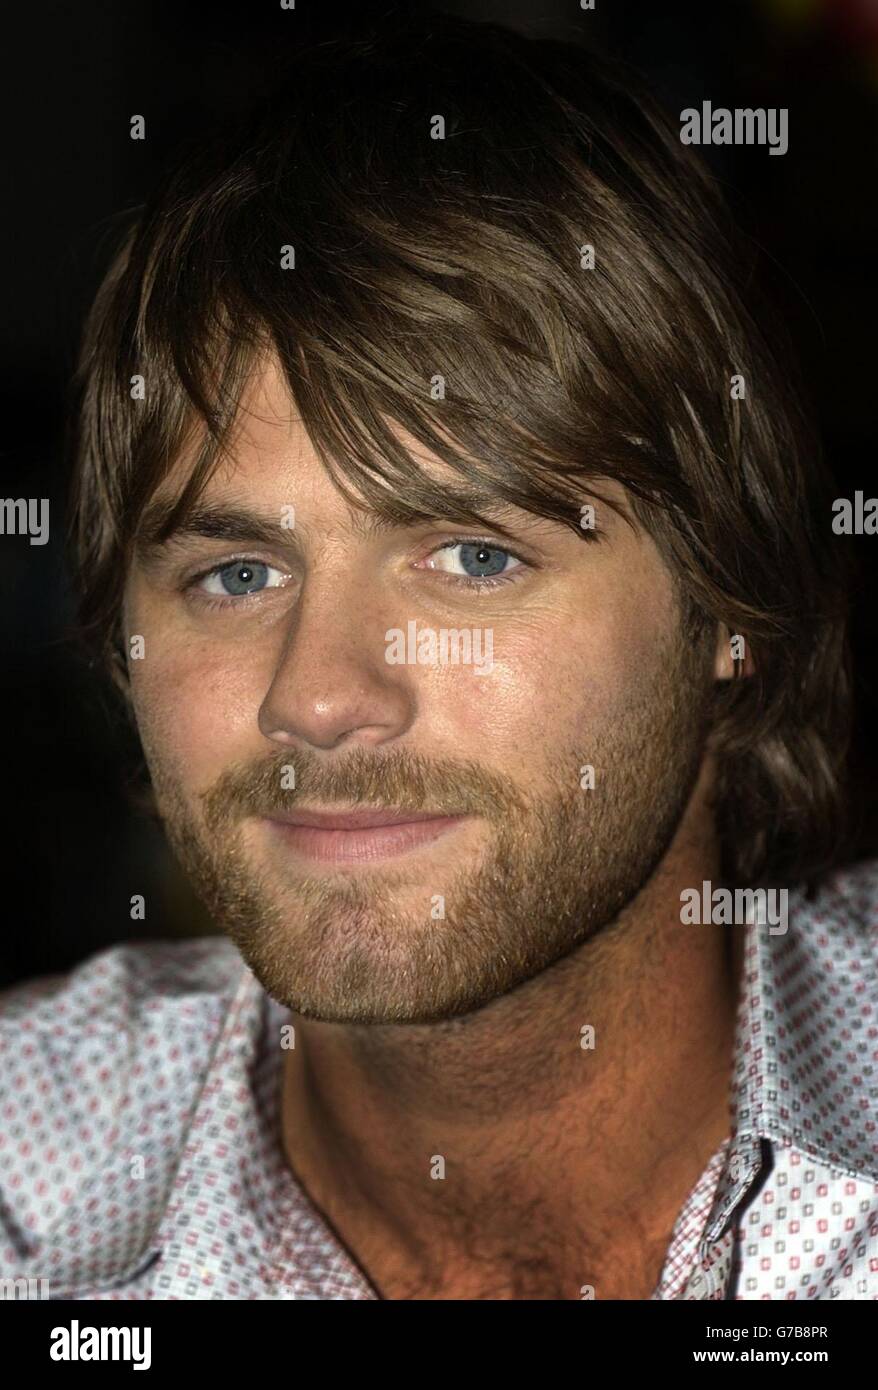 Ex Westlife Singer Brian Mcfadden Met Some Of His Fans While Signing Copies Of His New Single In Edinburgh 12 09 04 Bryan Mcfadden Who Was Celebrating After His First Solo Single Stormed To The